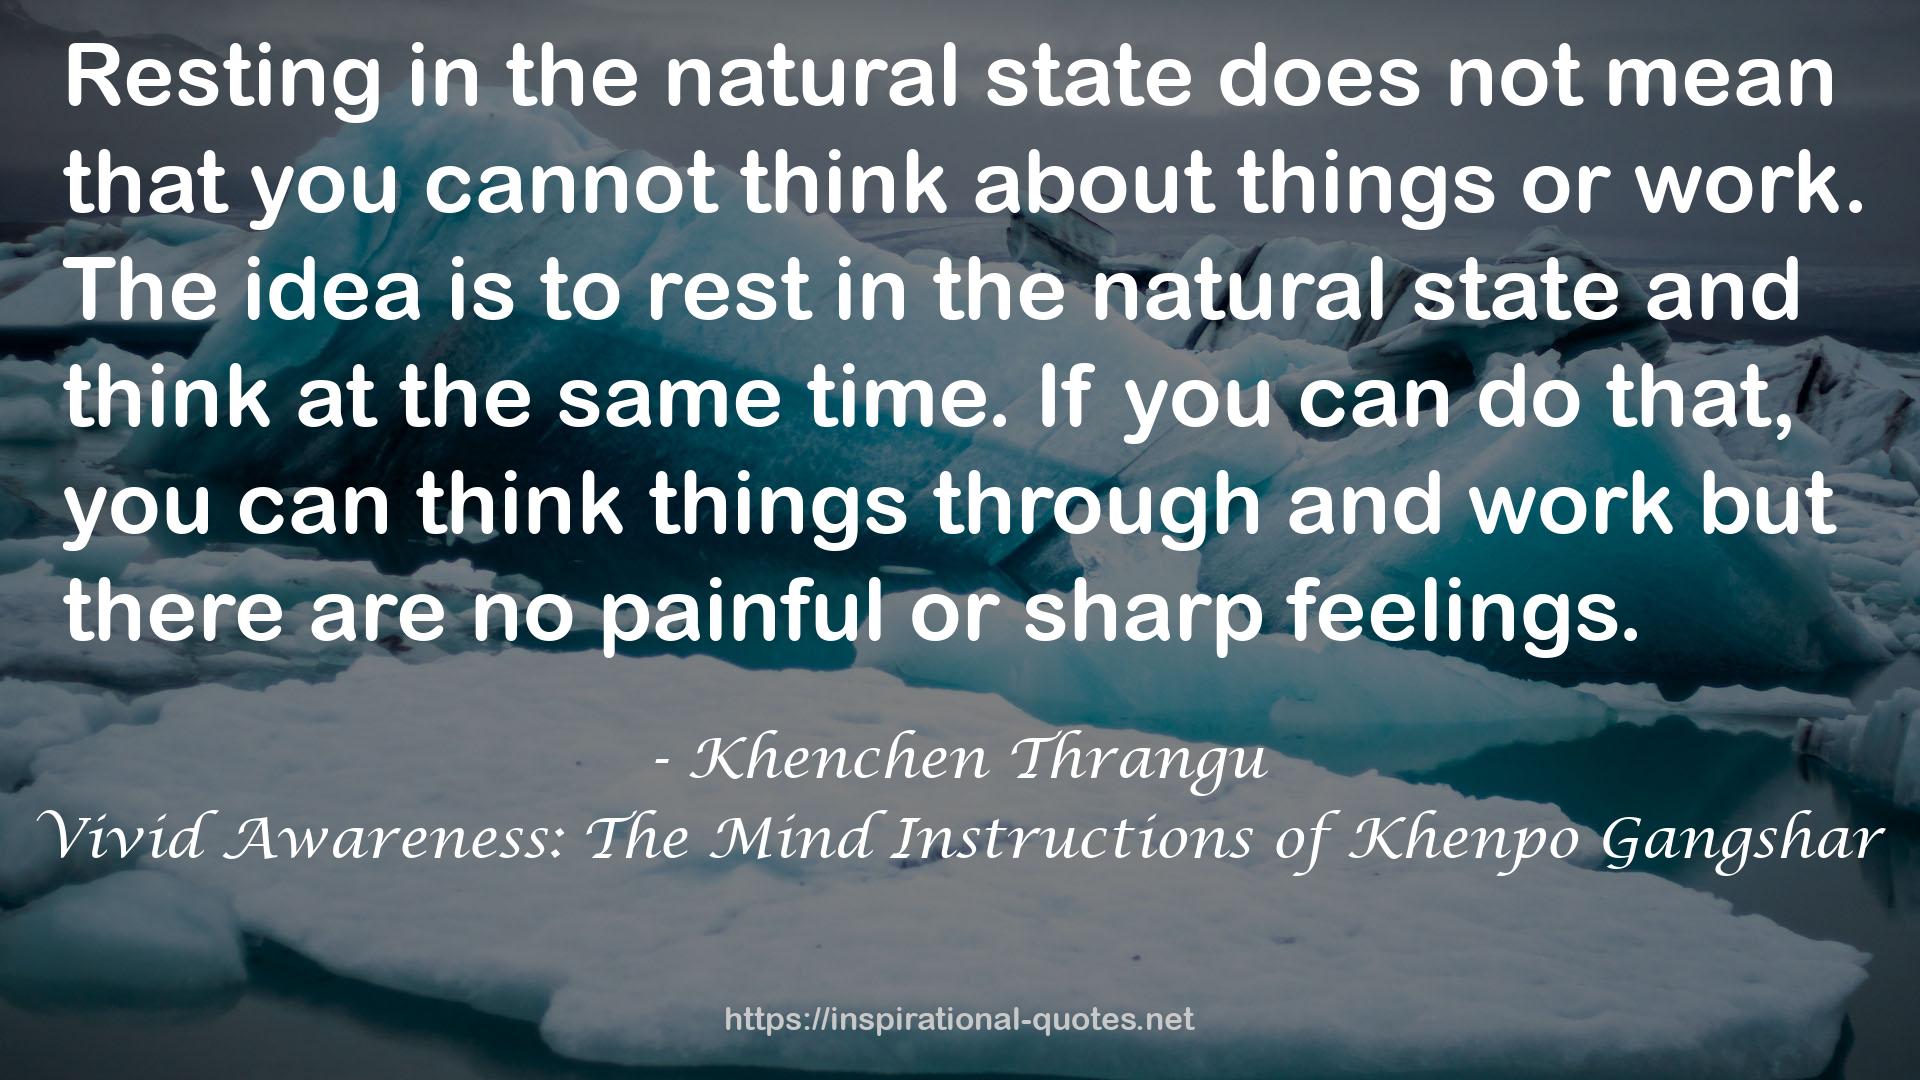 Vivid Awareness: The Mind Instructions of Khenpo Gangshar QUOTES